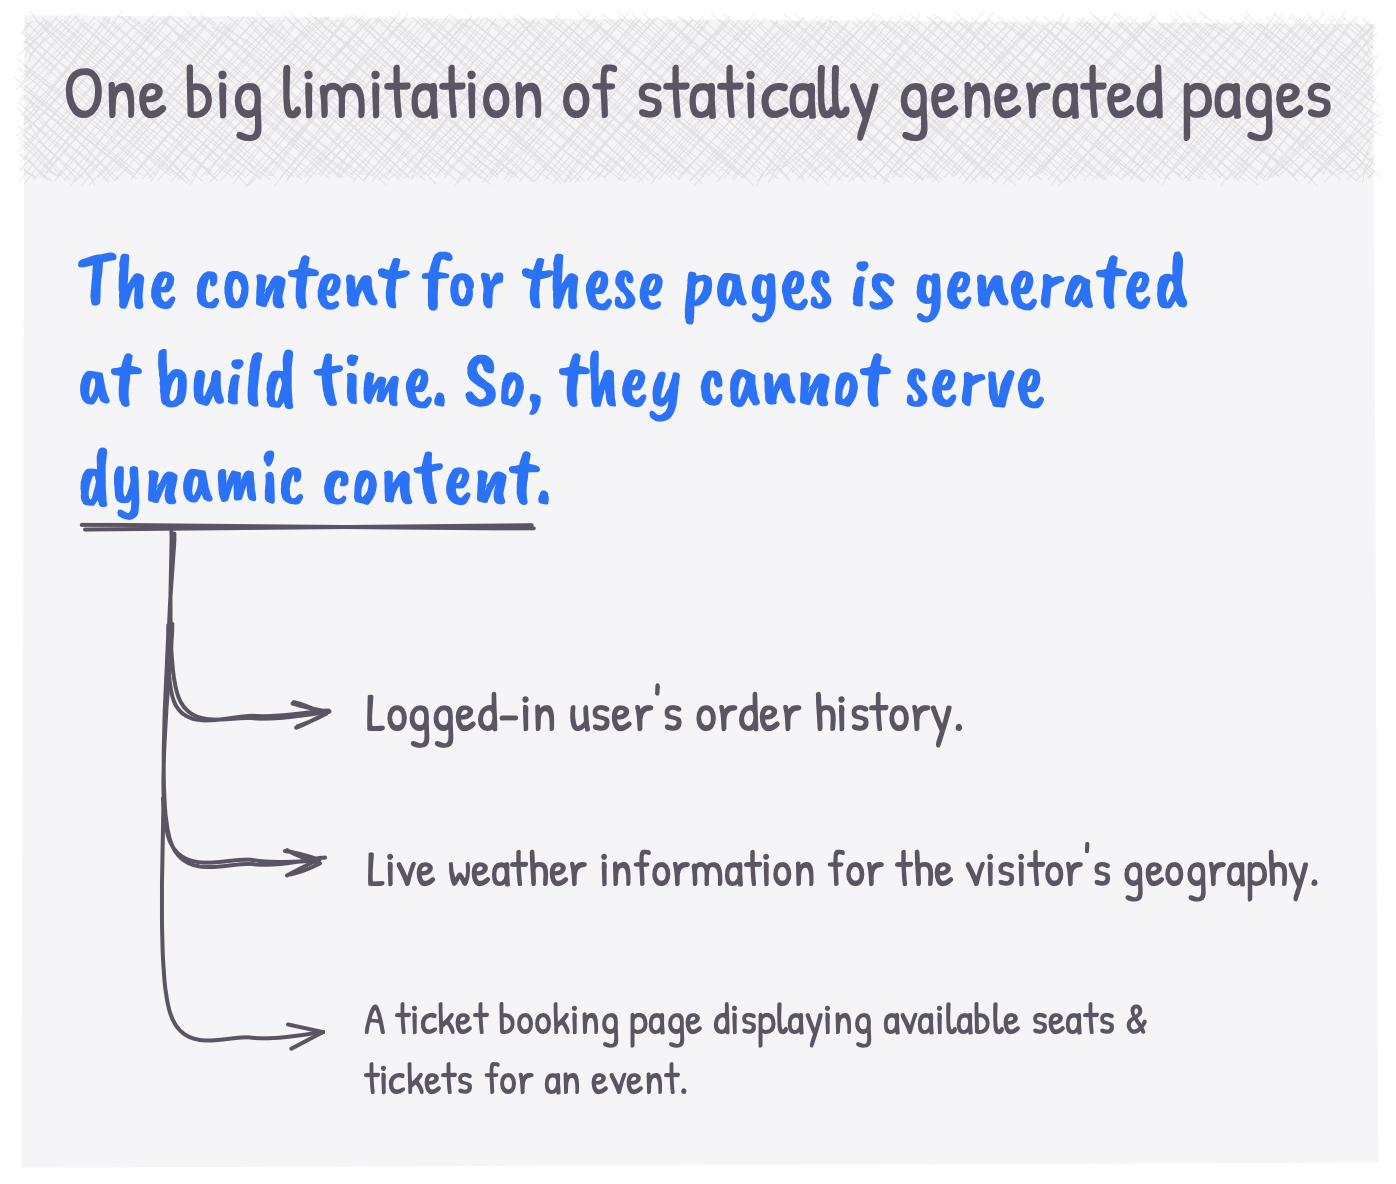 What kind of content cannot be served via statically generated pages?